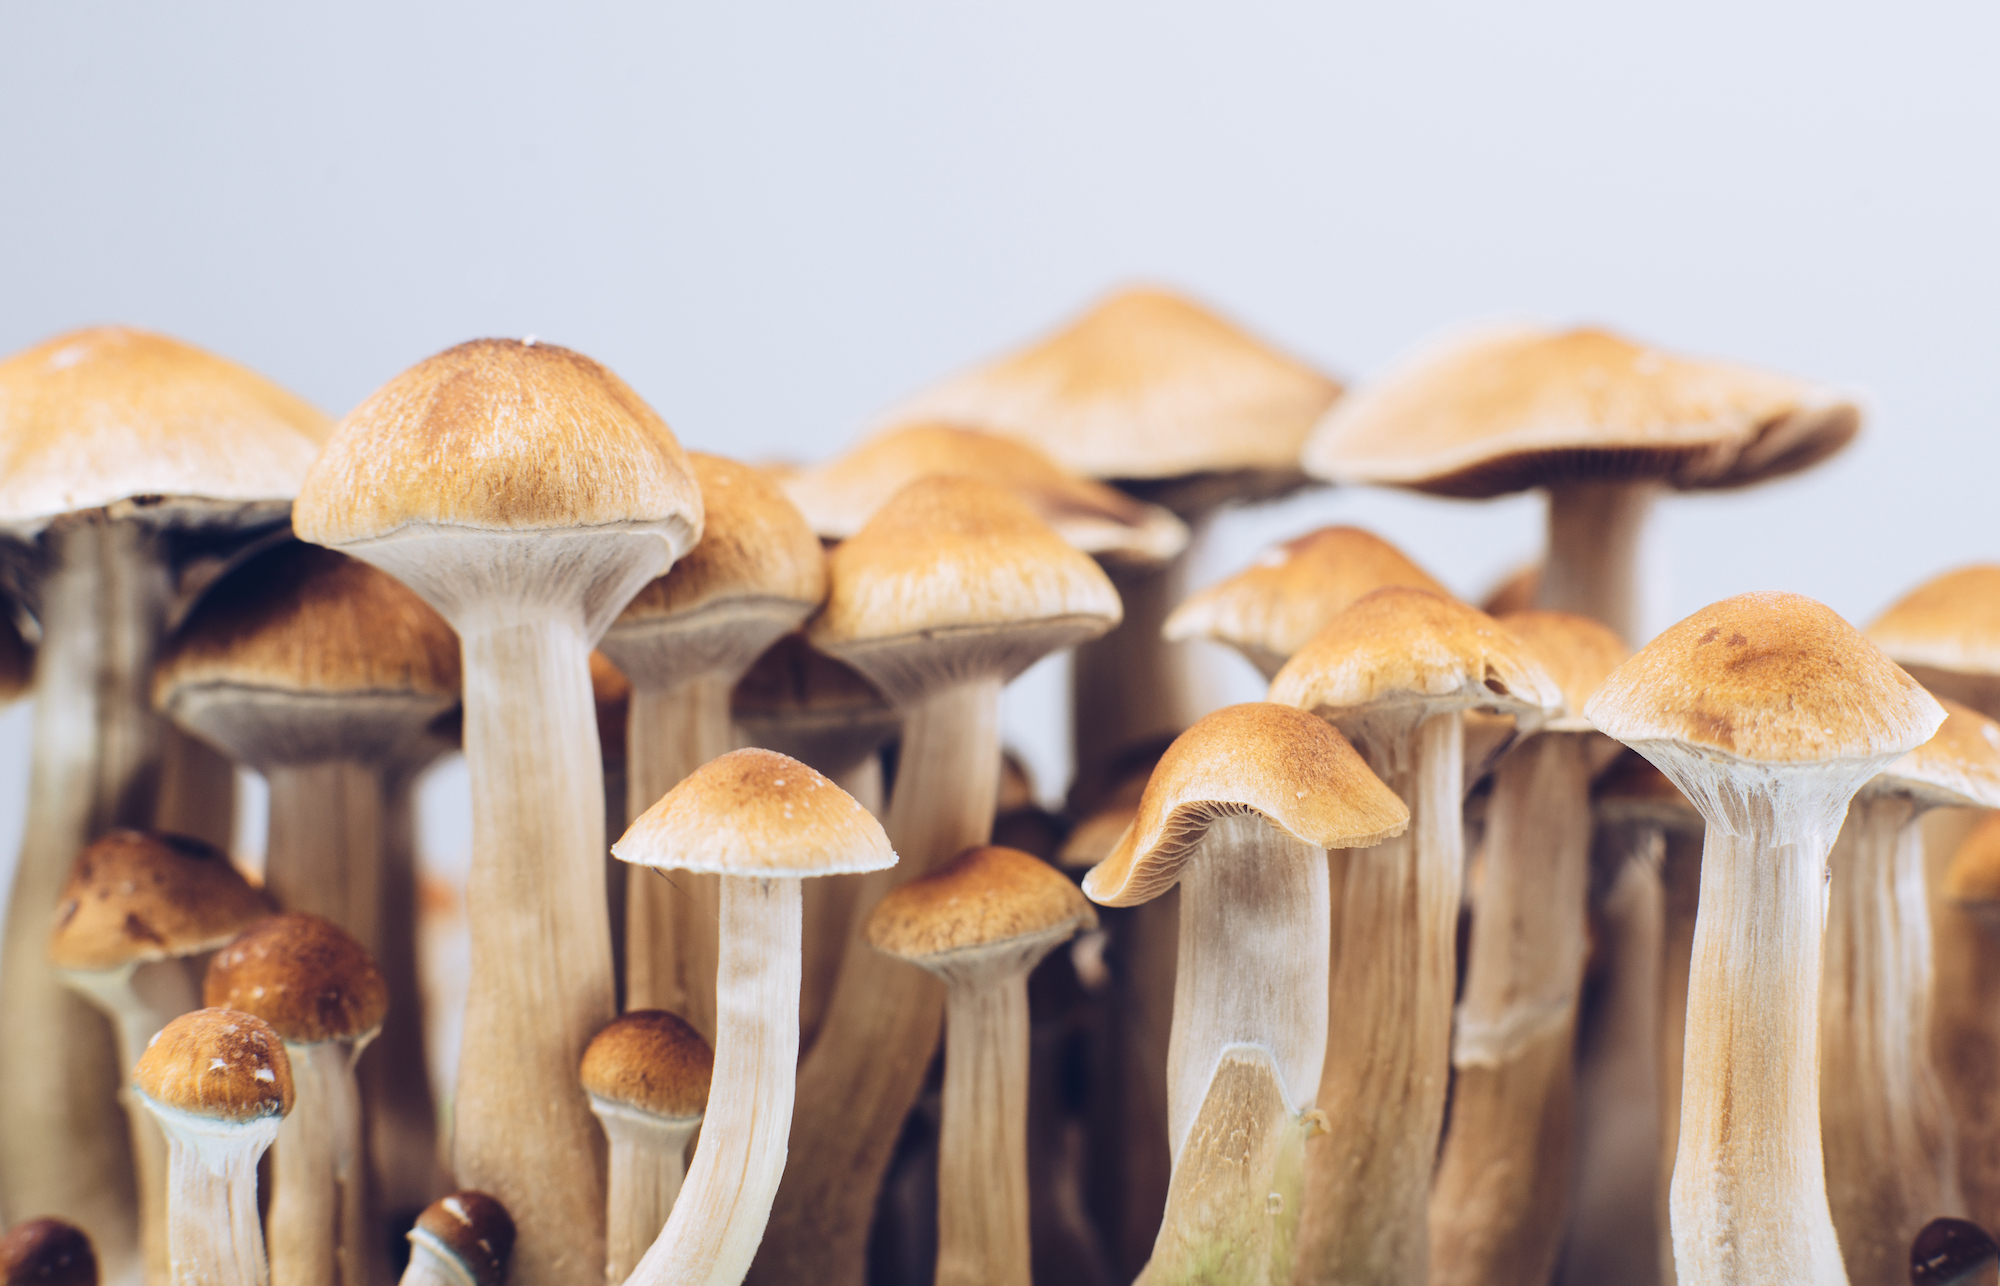 The Role of Set and Setting in Psychedelic Experiences